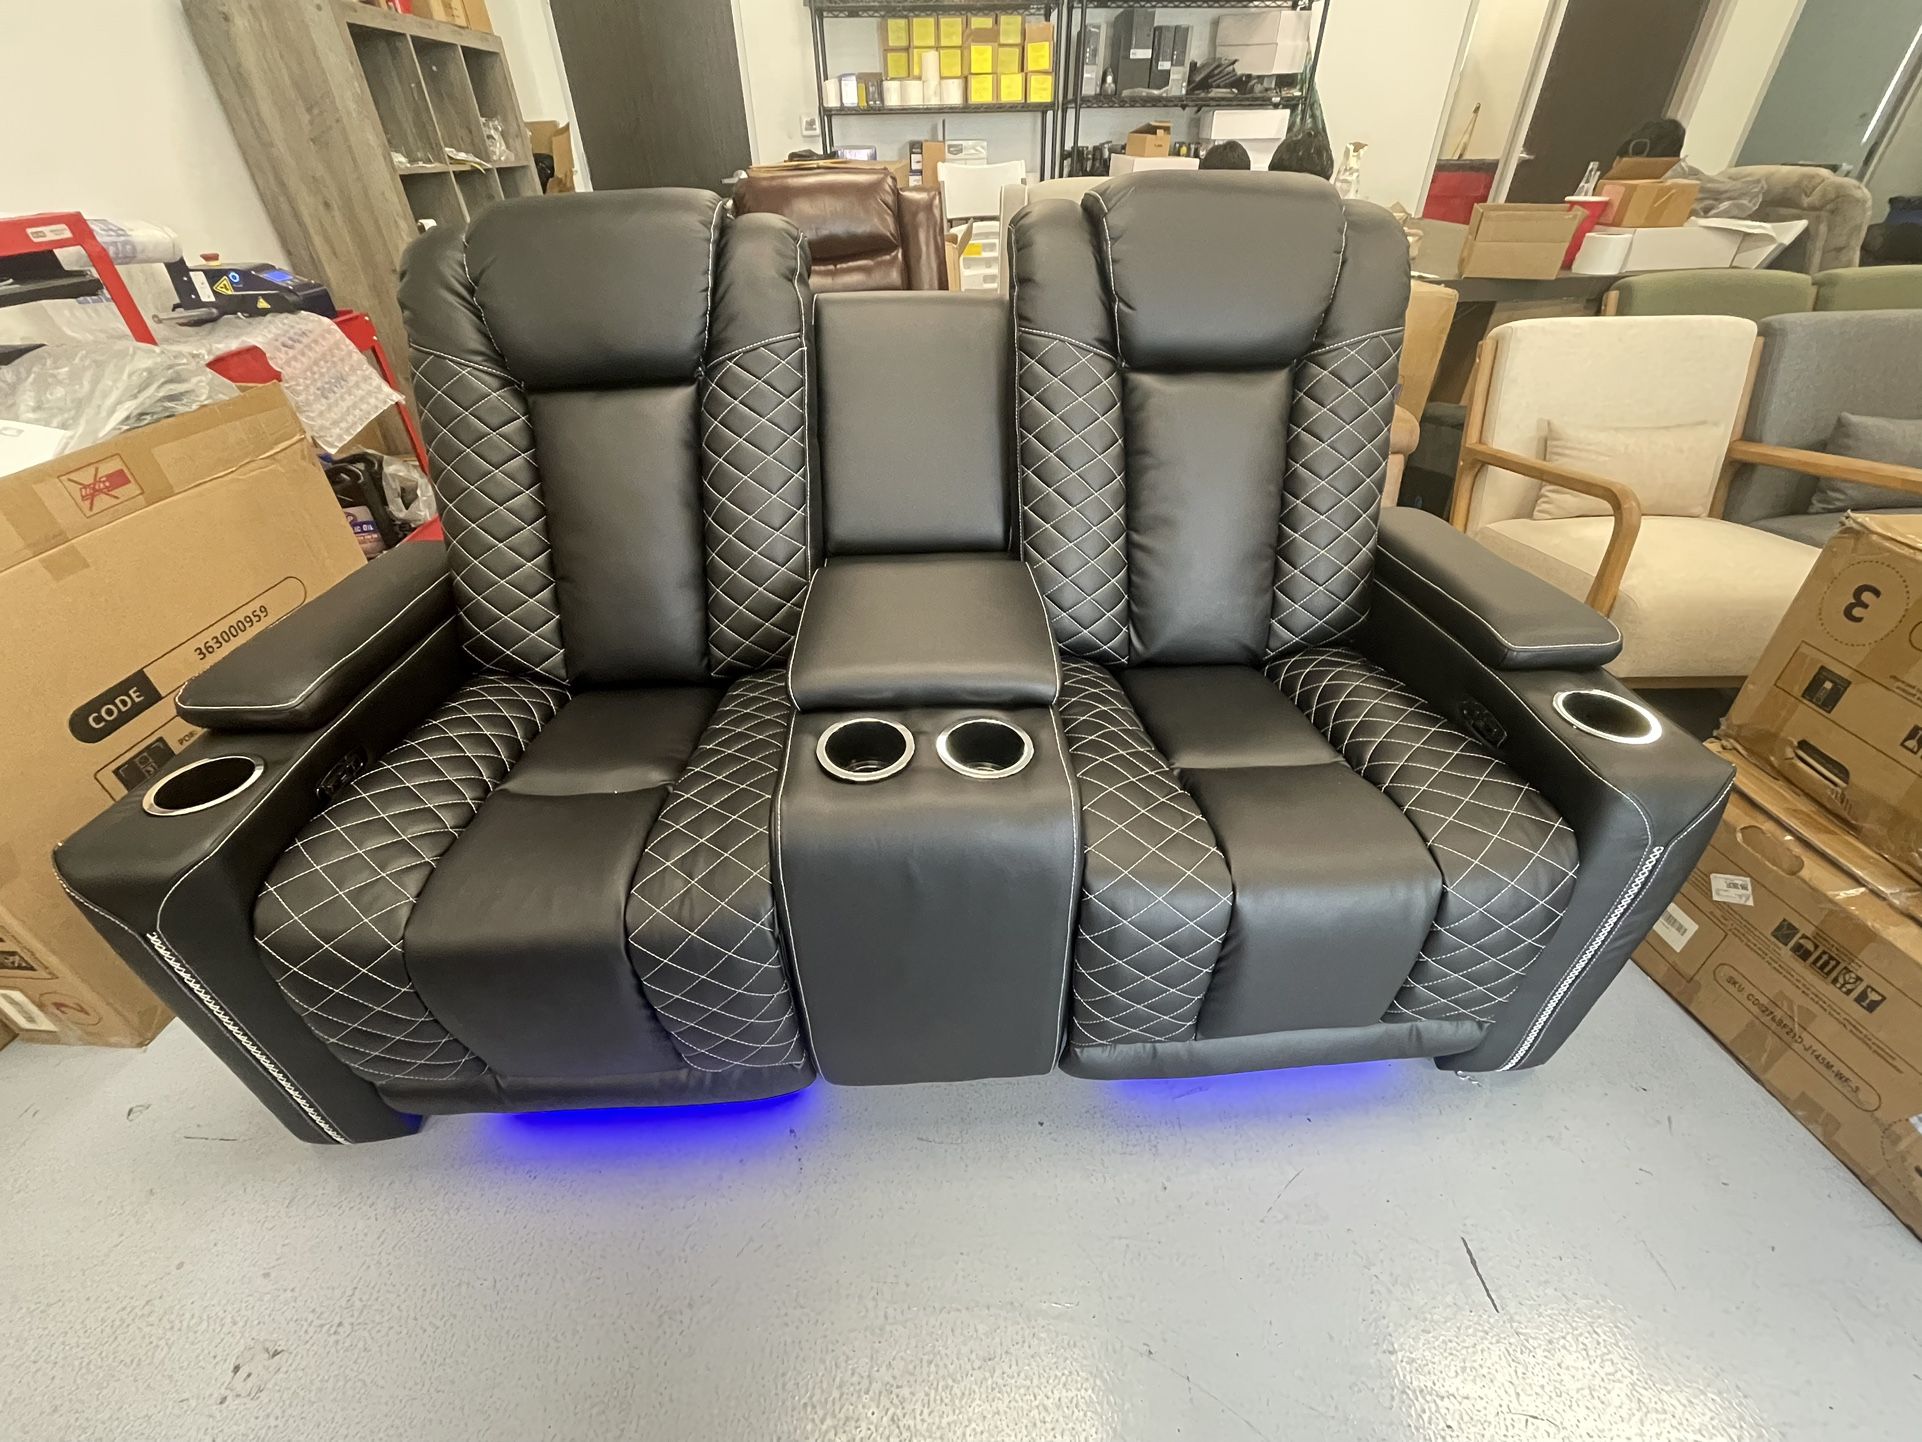 Electric Power Leather Loveseat Recliner With Arm Storage; LED Lights; USB Port